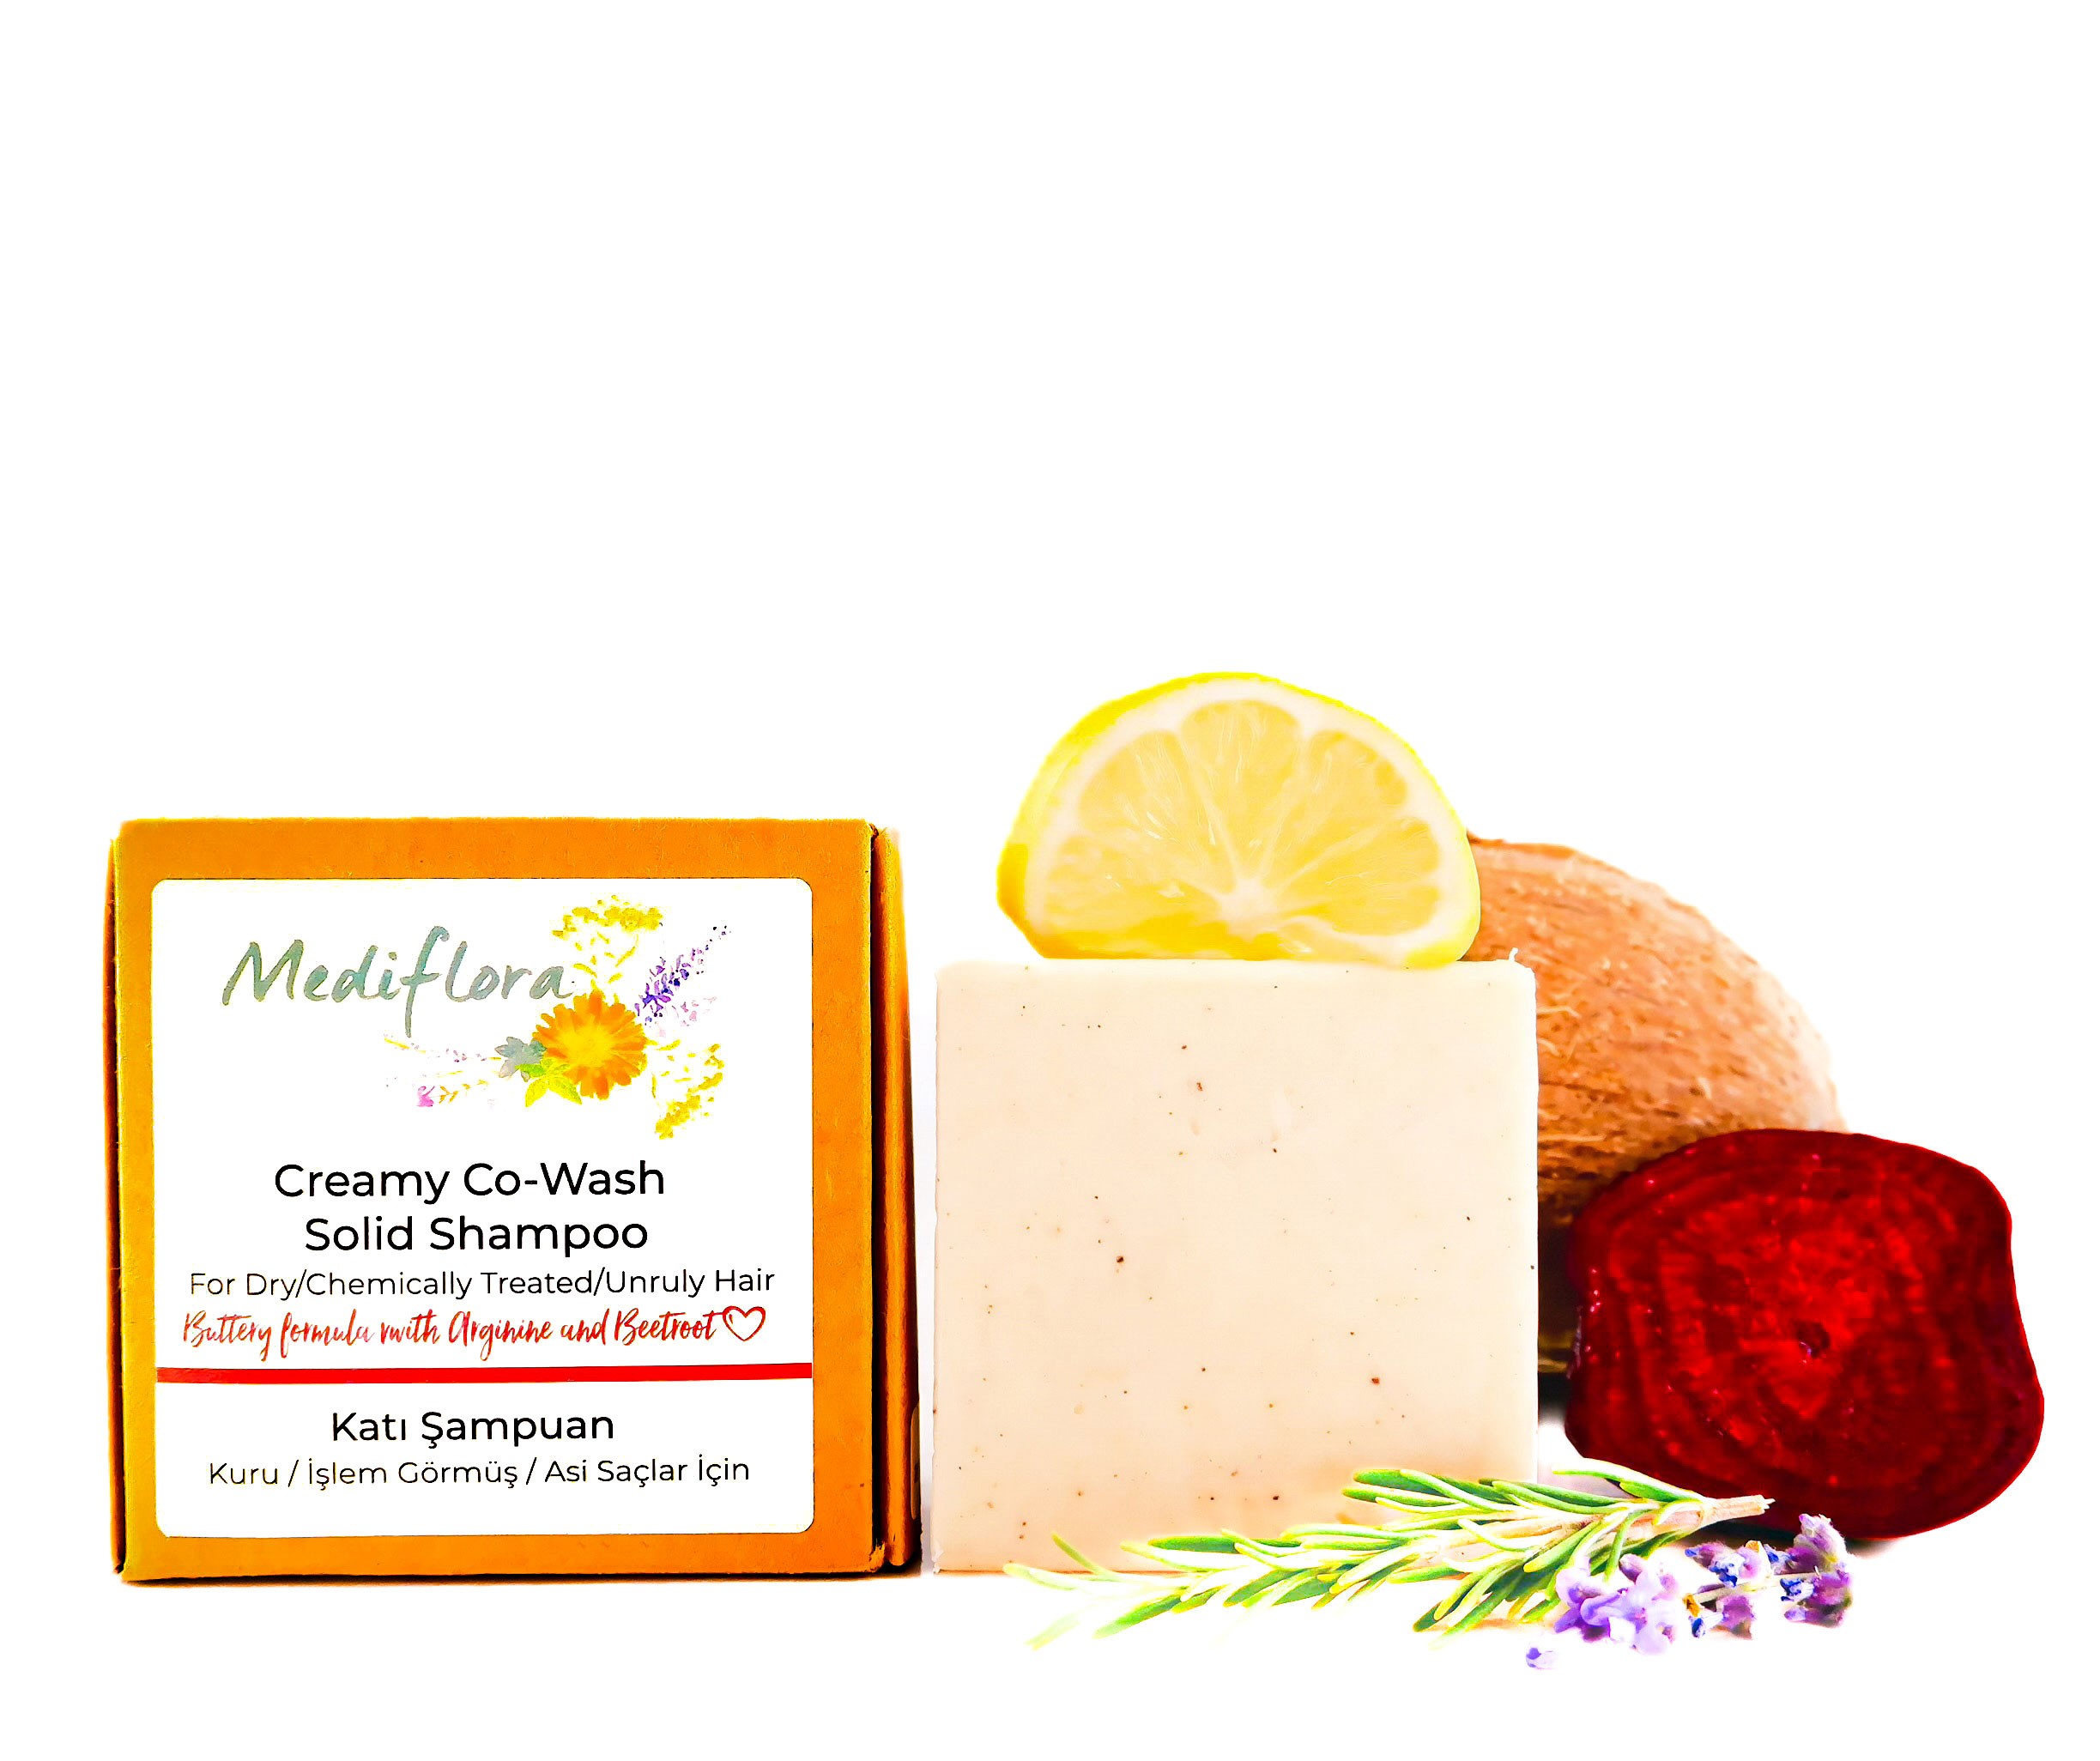 Creamy Co-Wash Solid Shampoo for Chemically Treated /Dry/Unruly Hair